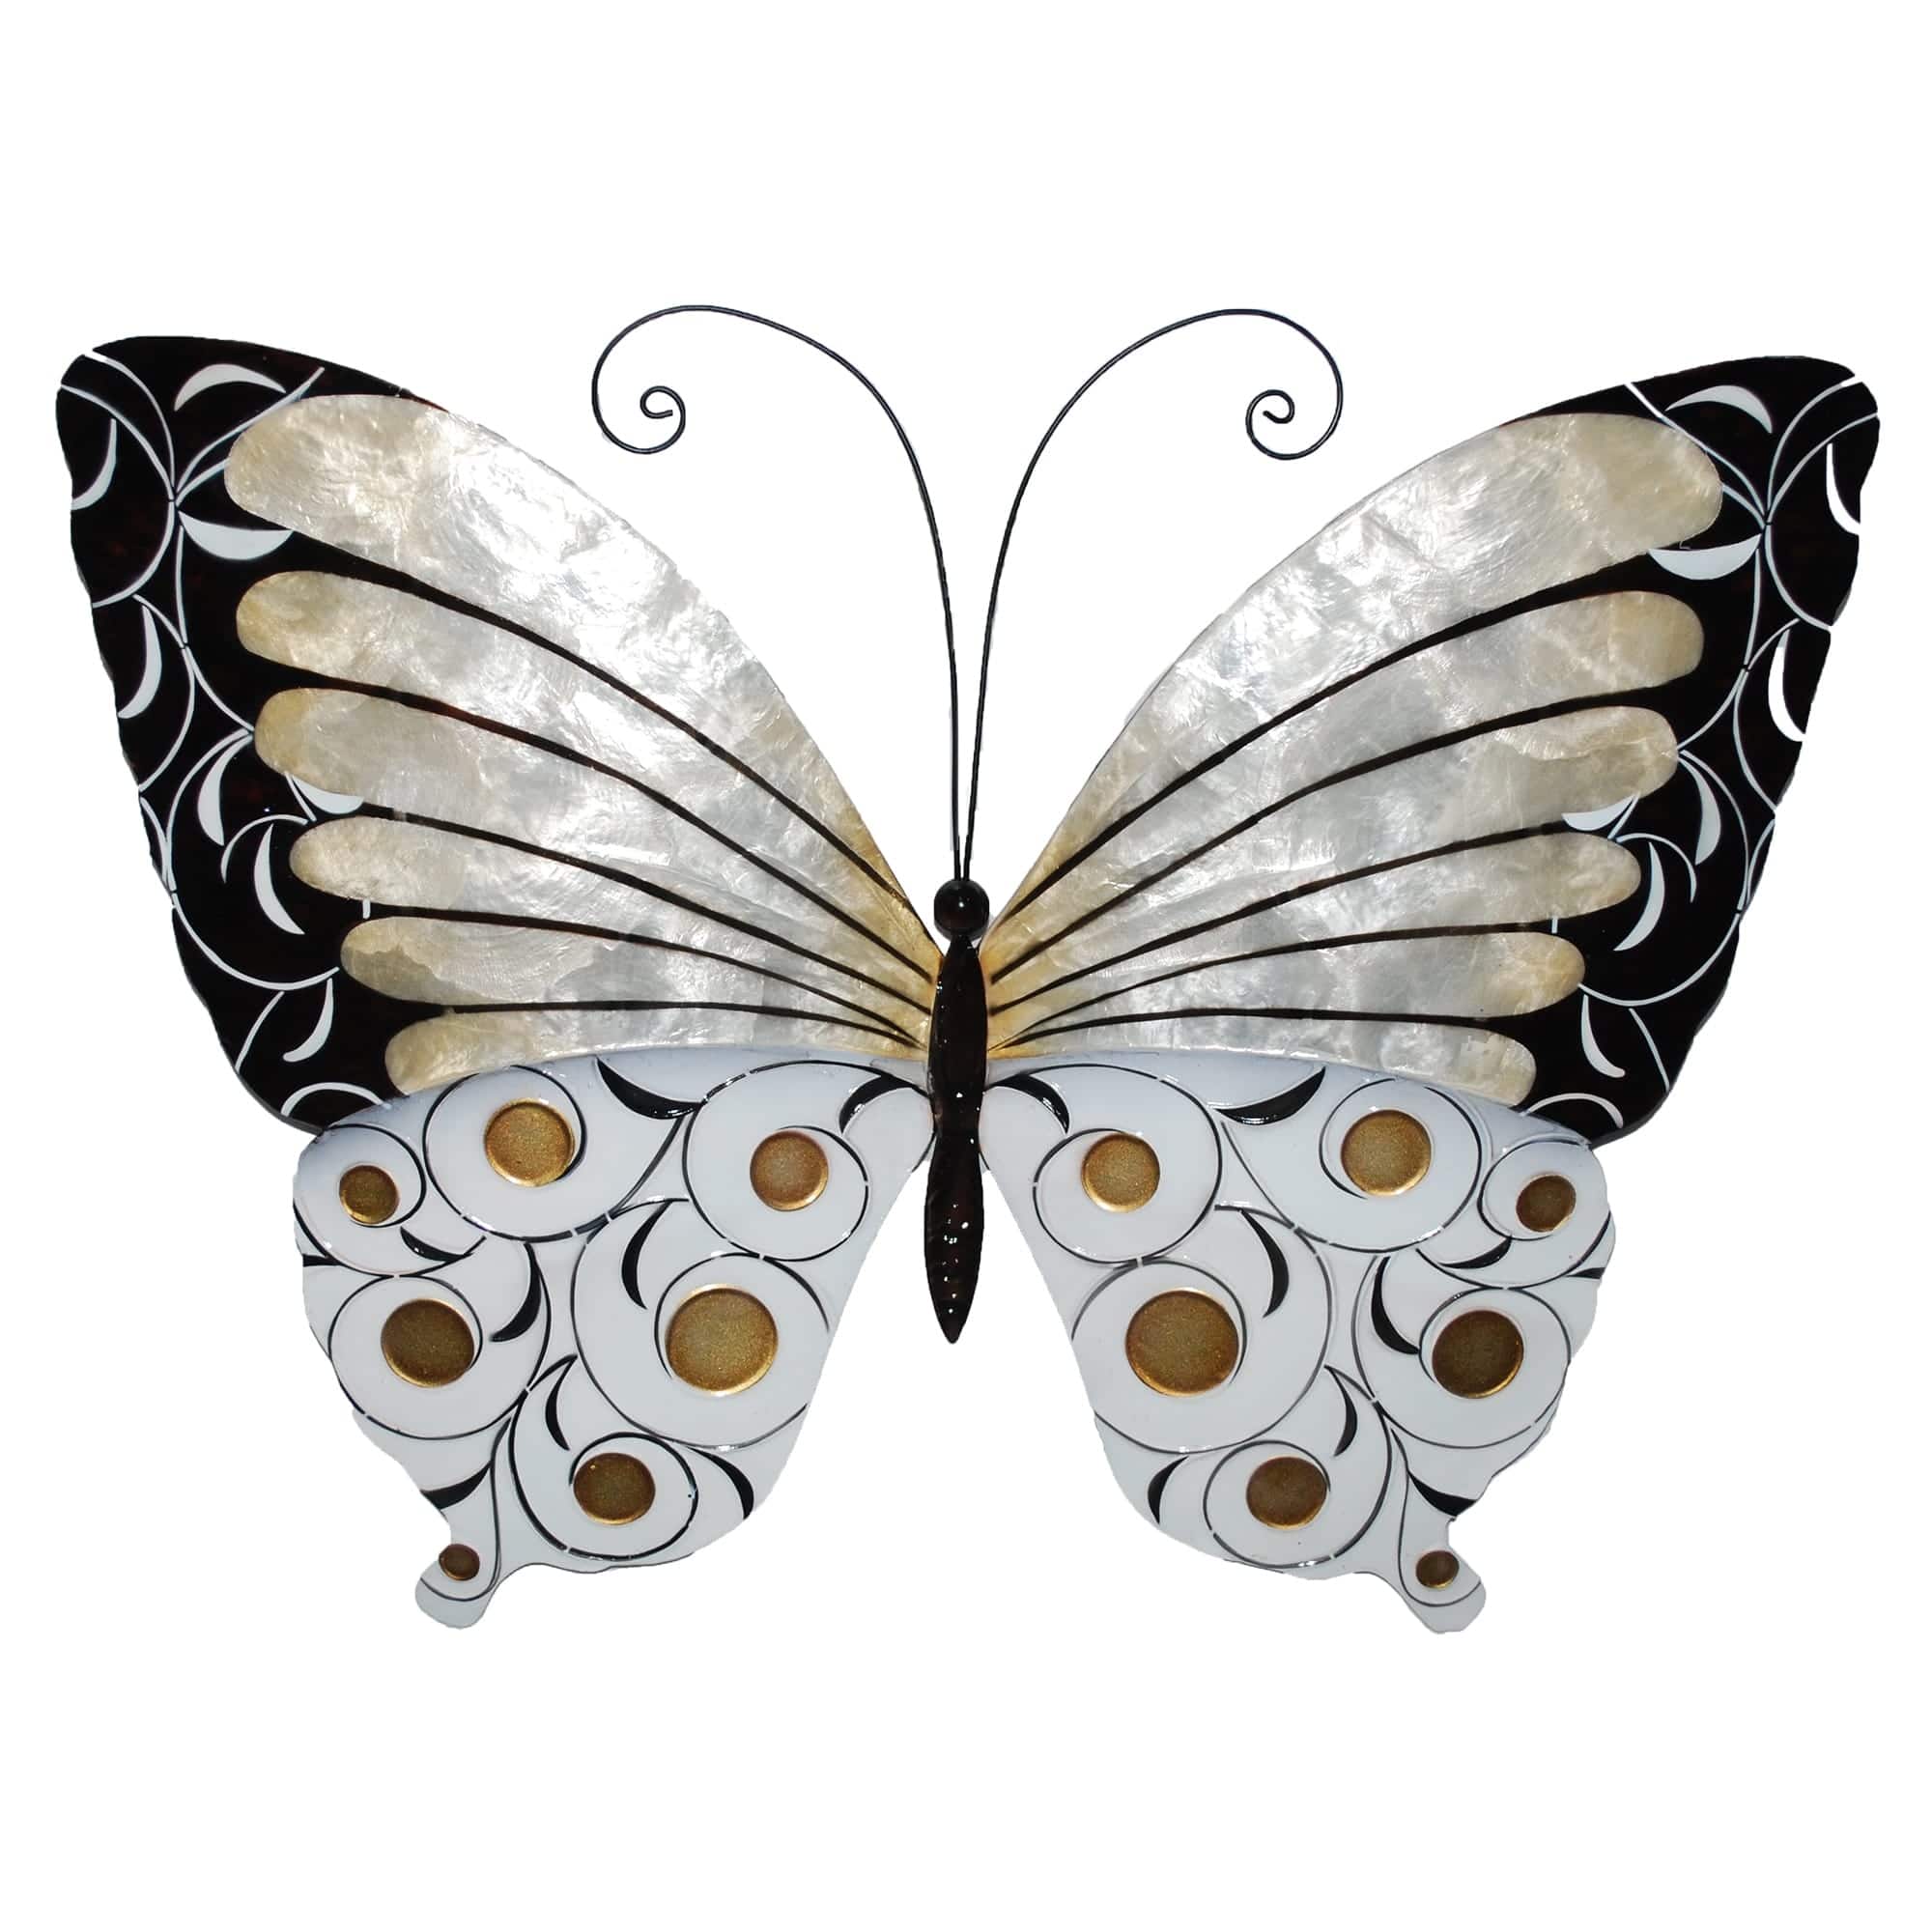 Black/ White/ Gold Butterfly Wall Decor with Pearlescent Capiz Shell - 1 x 18 x 13